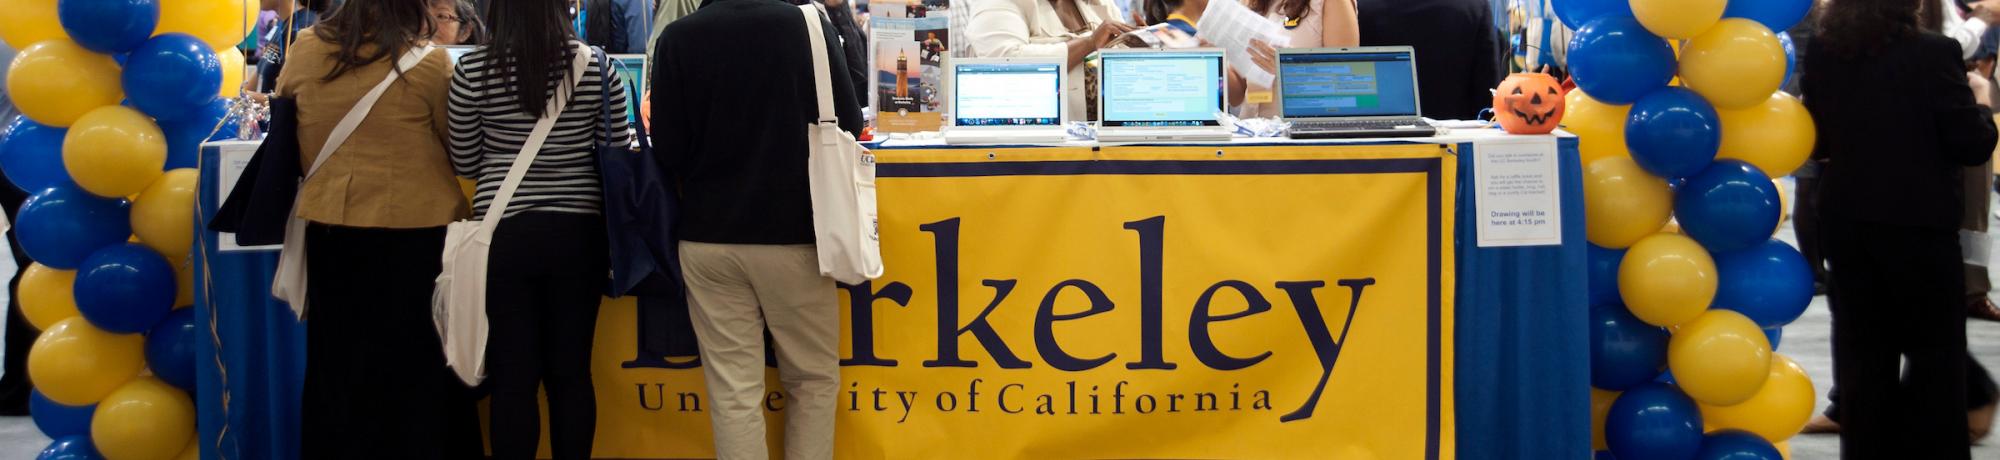 UC Berkeley booth at event